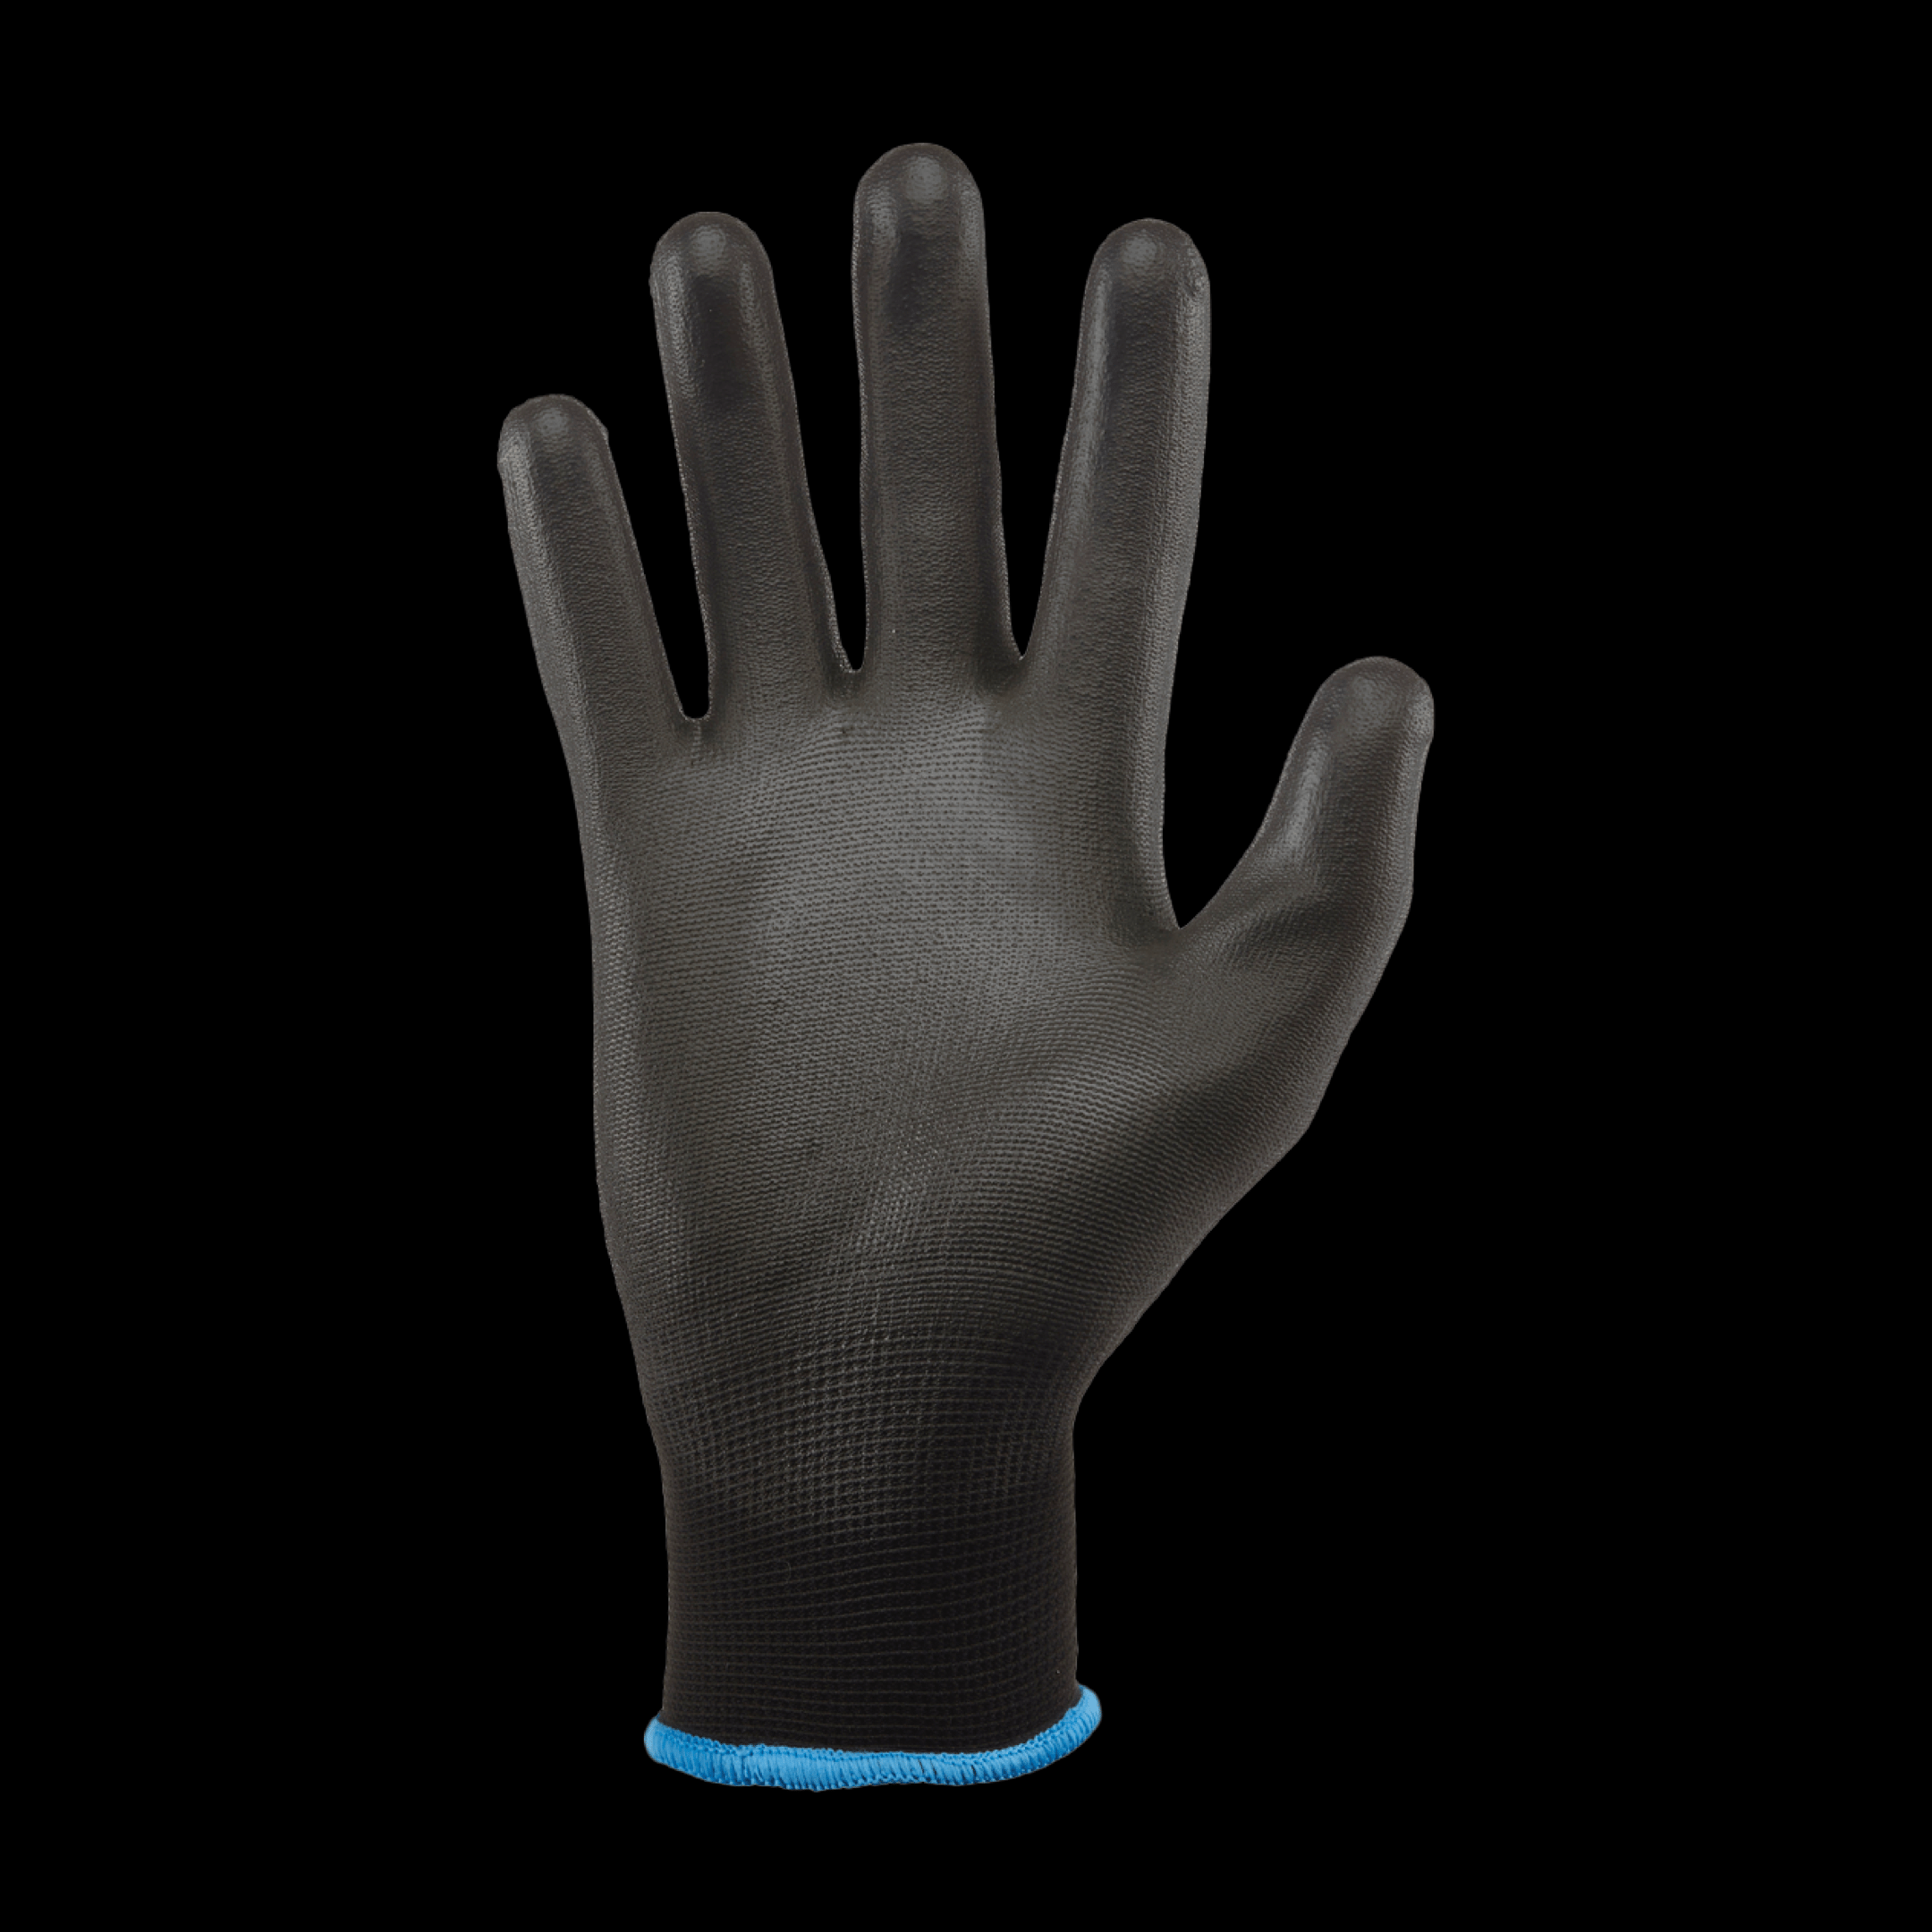 http://www.gorillagripgloves.com/wp-content/uploads/2022/04/core_image_2.png